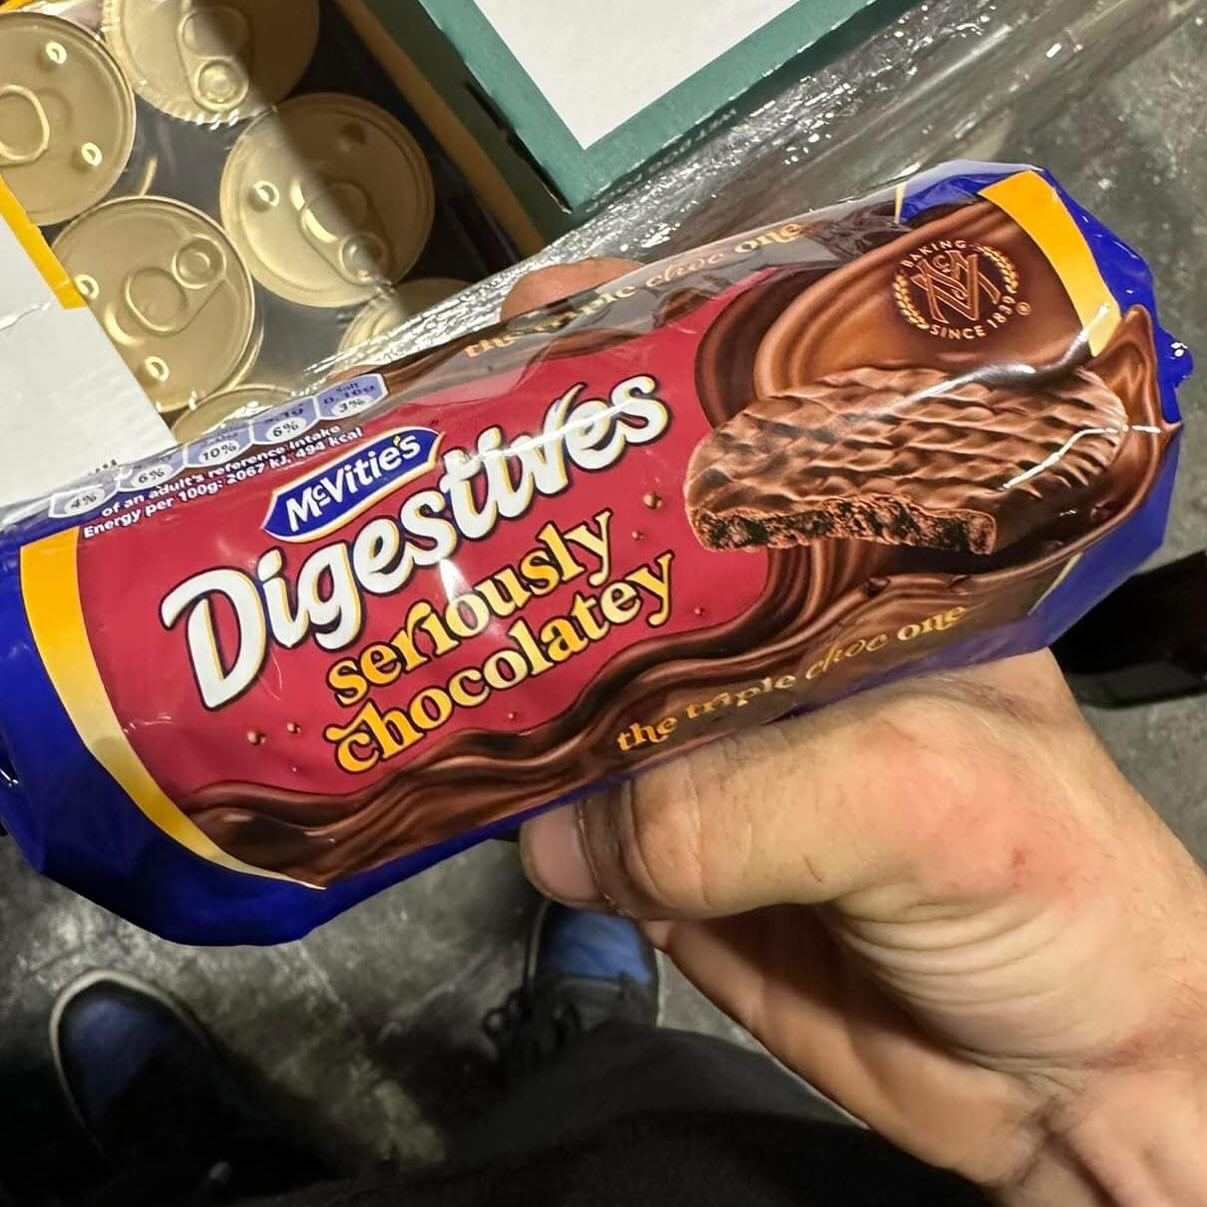 ‘These sound amazing’ shoppers go wild for new chocolatey McVitie’s biscuits set to hit the shelves